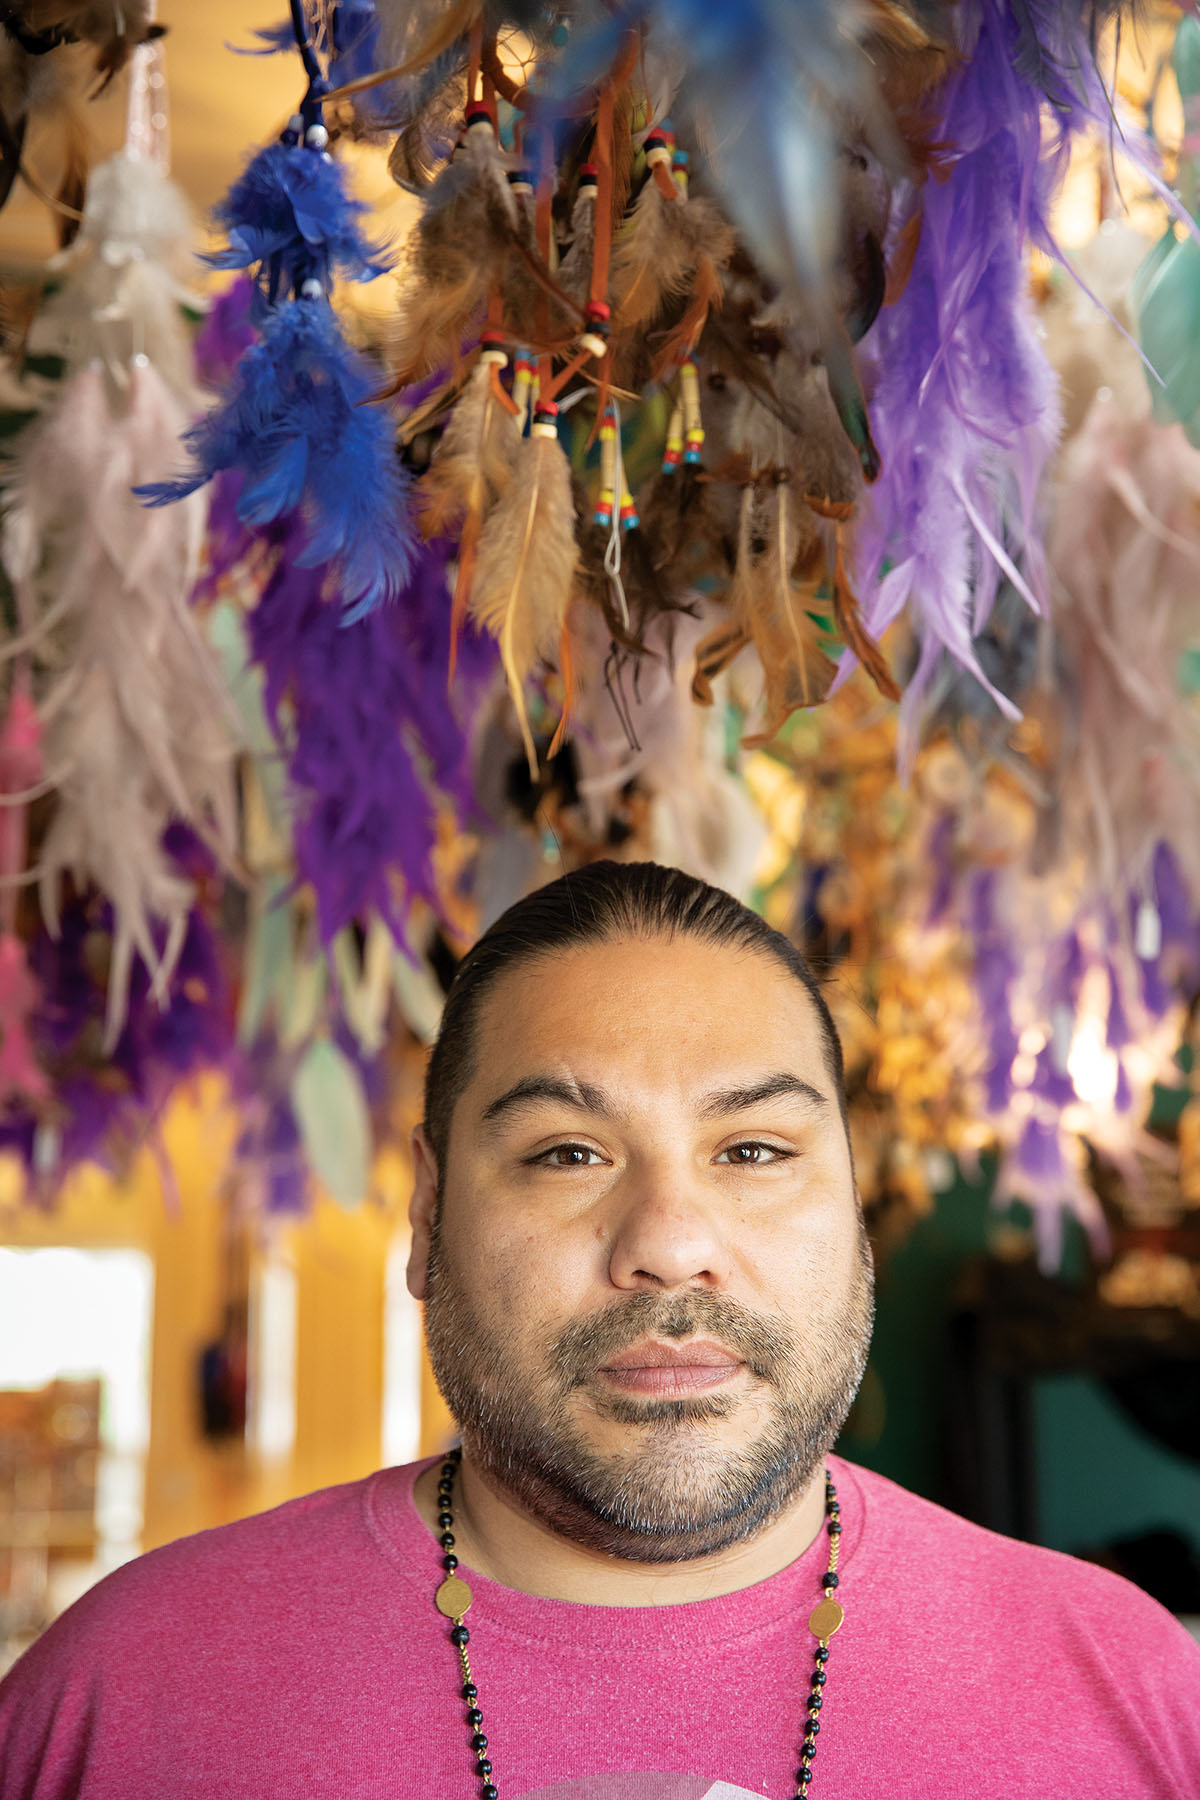 A man in a purple shirt stands in front of a brightly colored background with numerous feathers